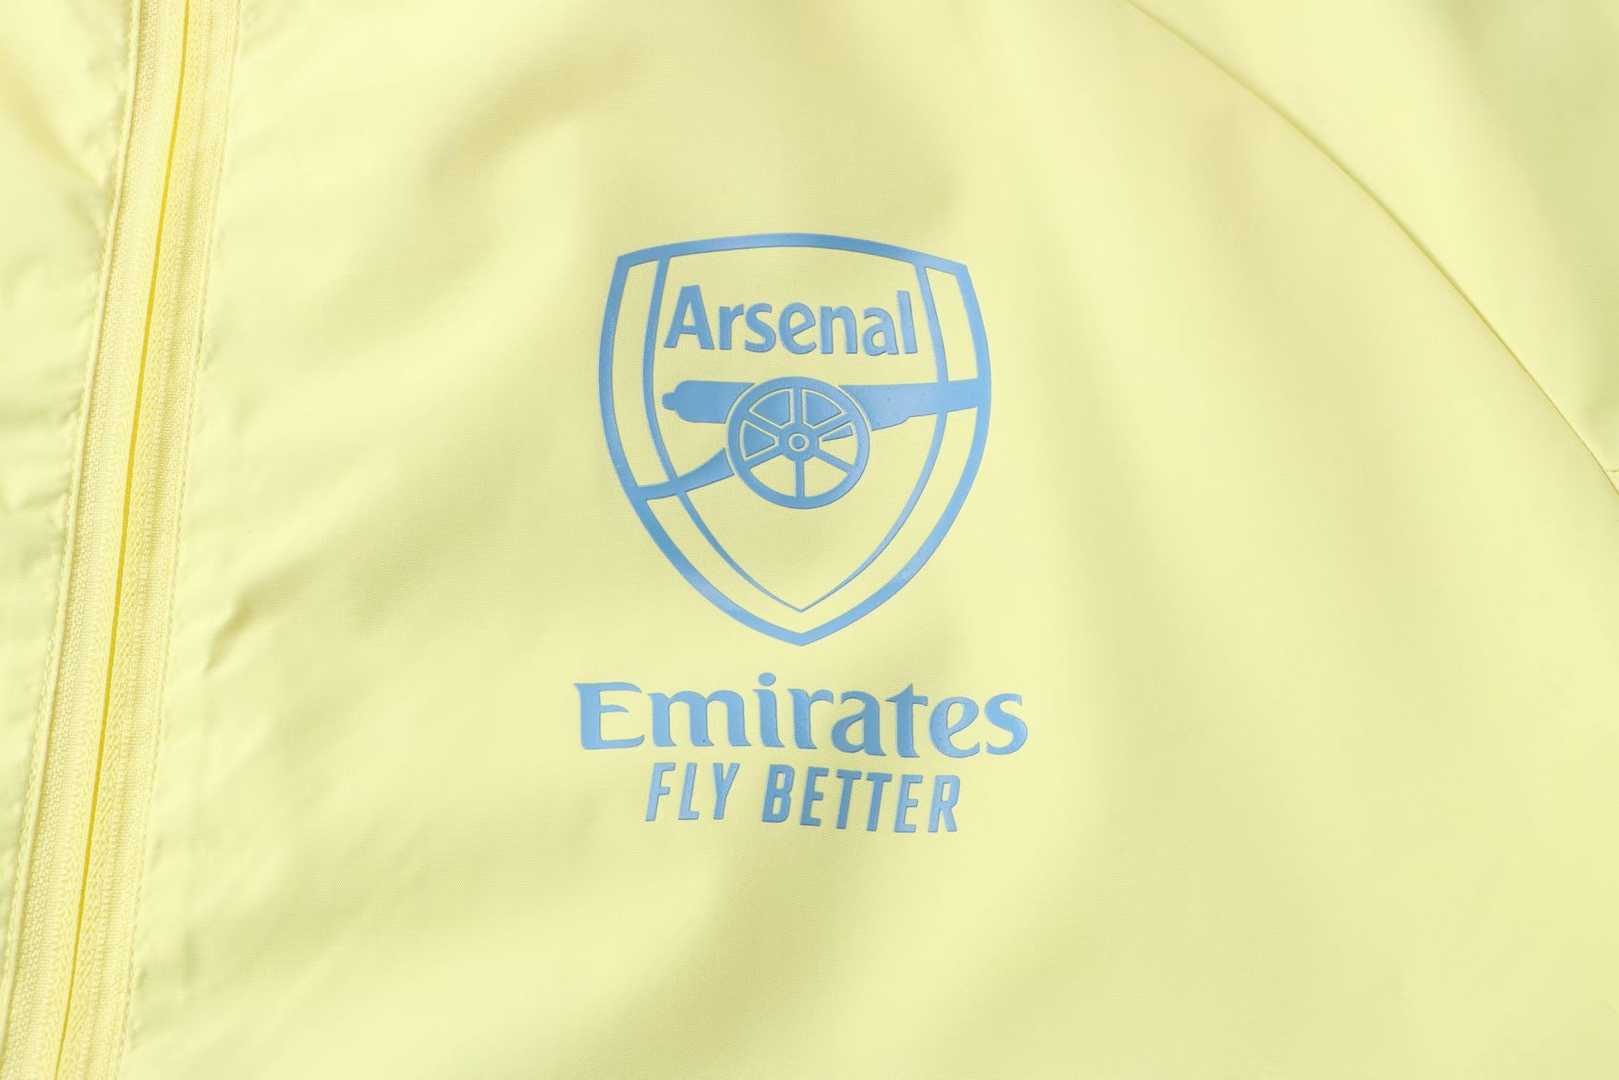 2020/21 Arsenal Yellow All Weather Windrunner Soccer Jacket Mens